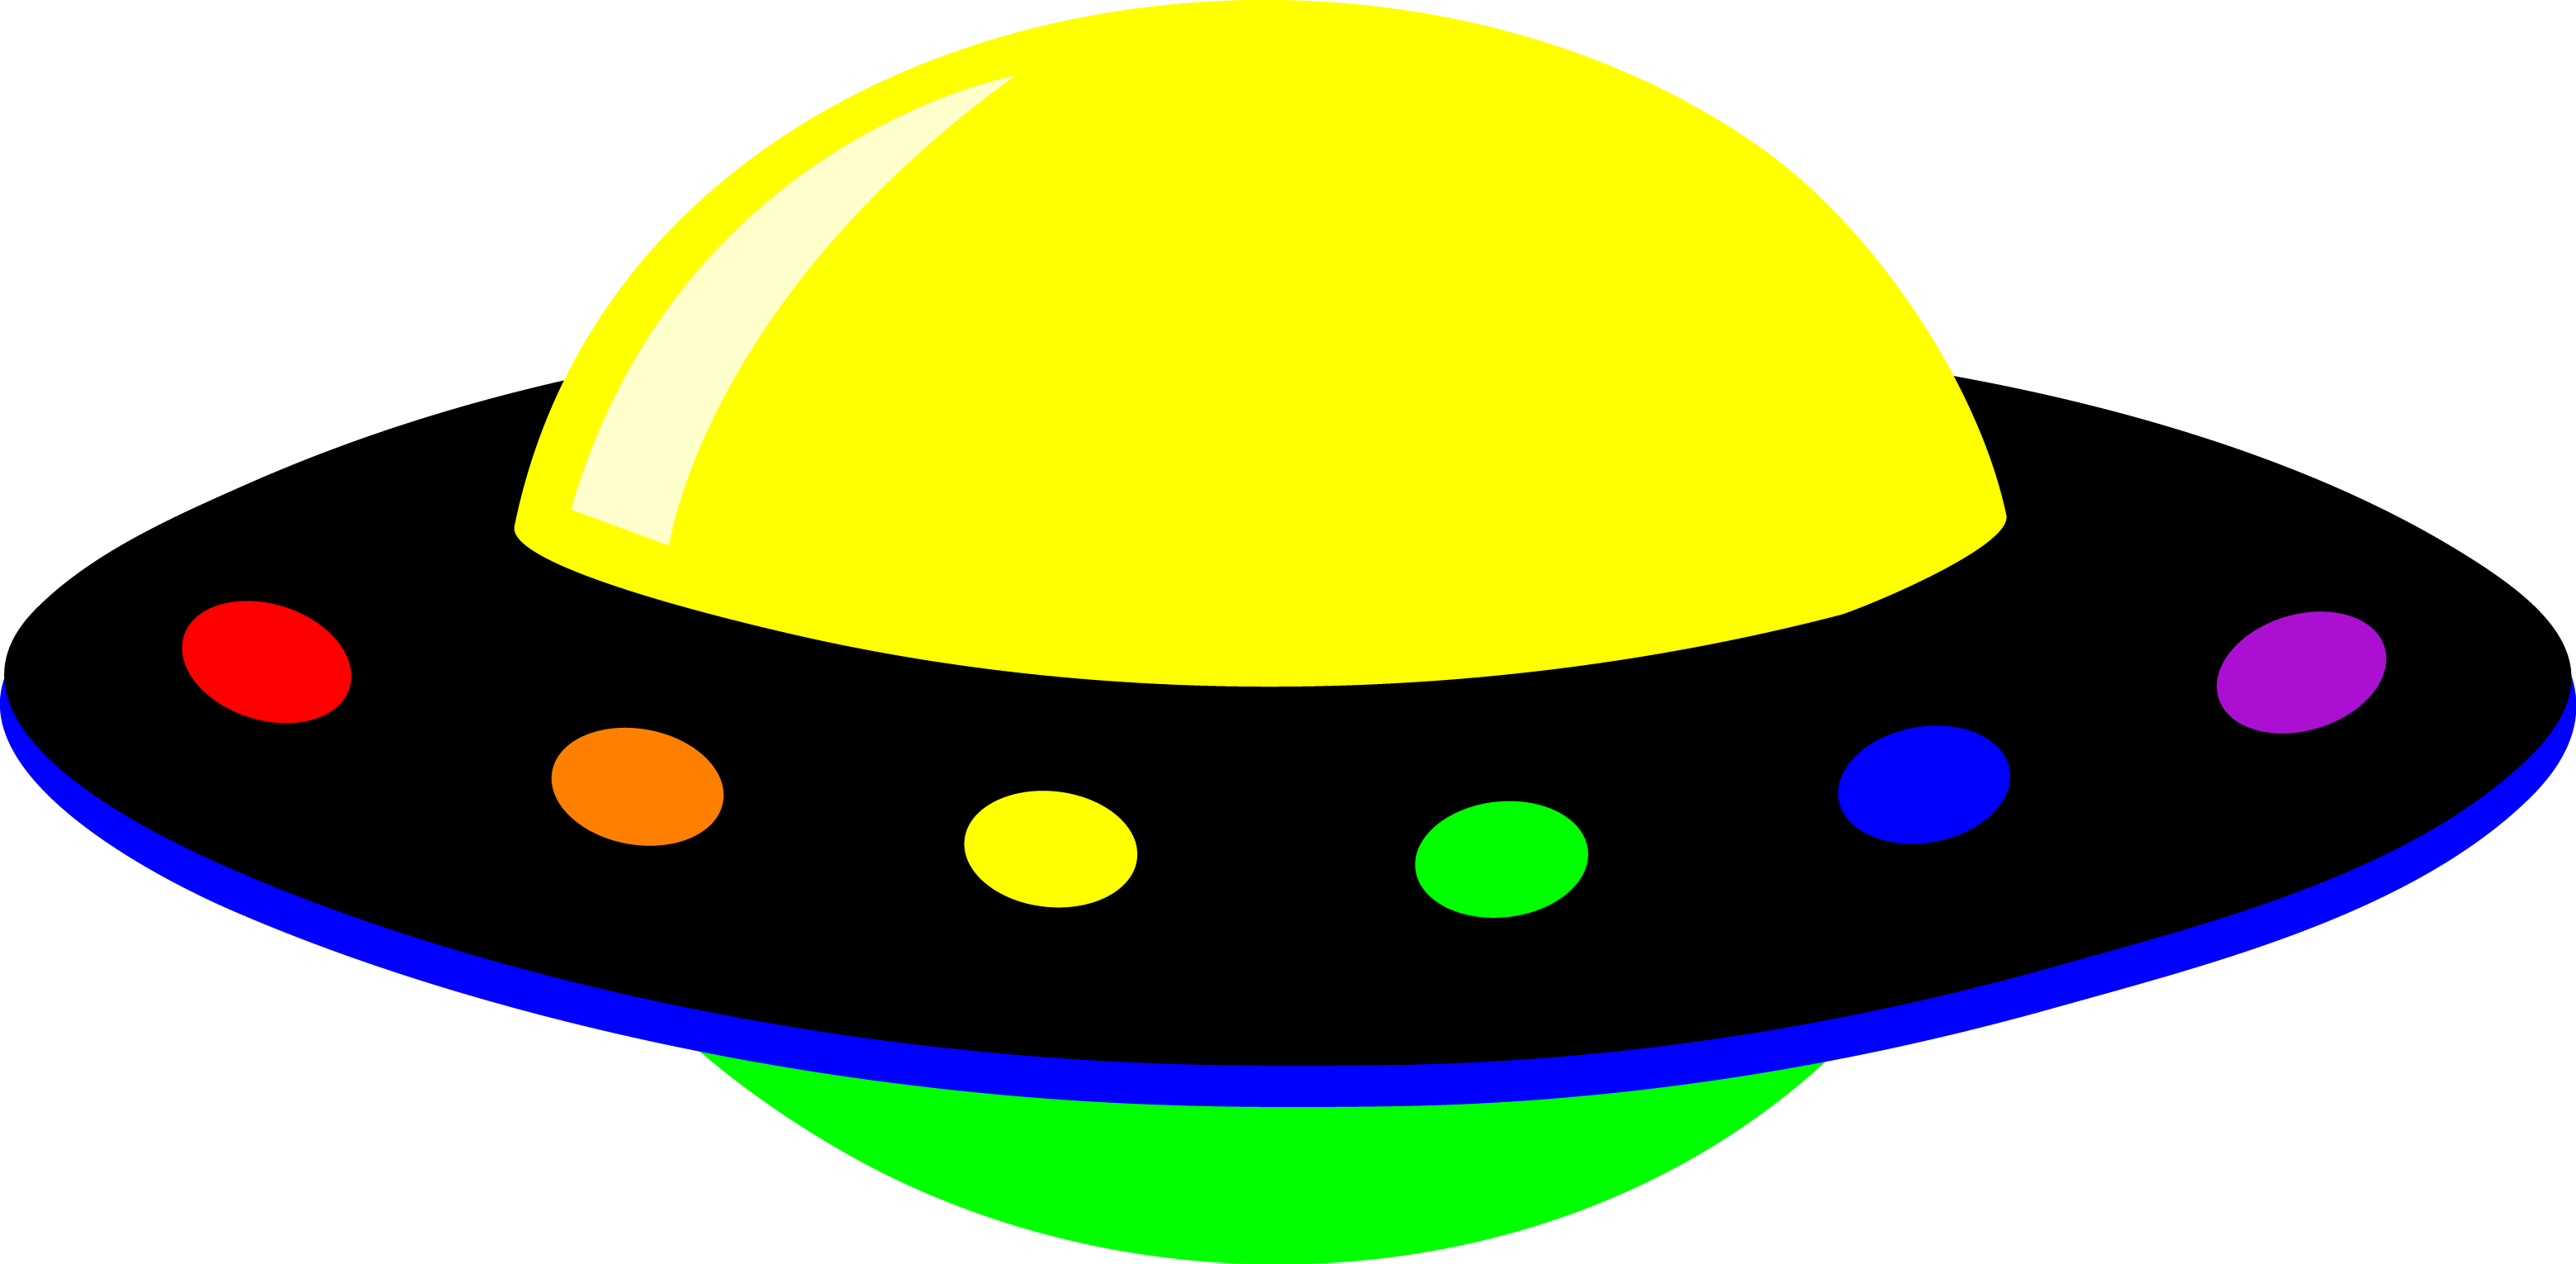 Flying saucer clipart 